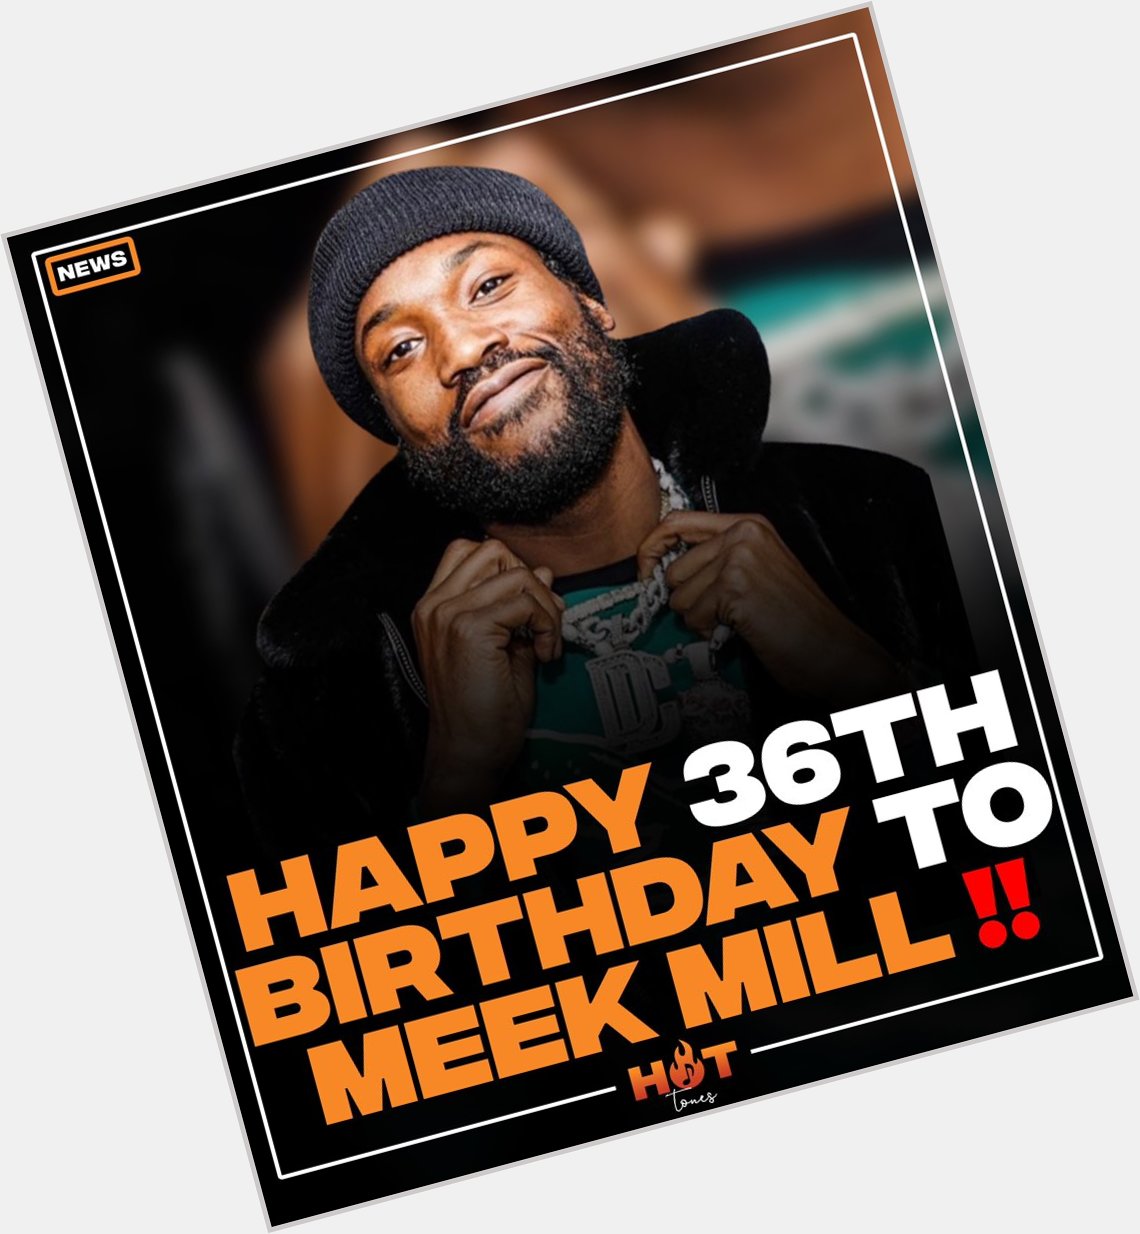 Happy 36th birthday to Meek Mill  Favorite song from him  